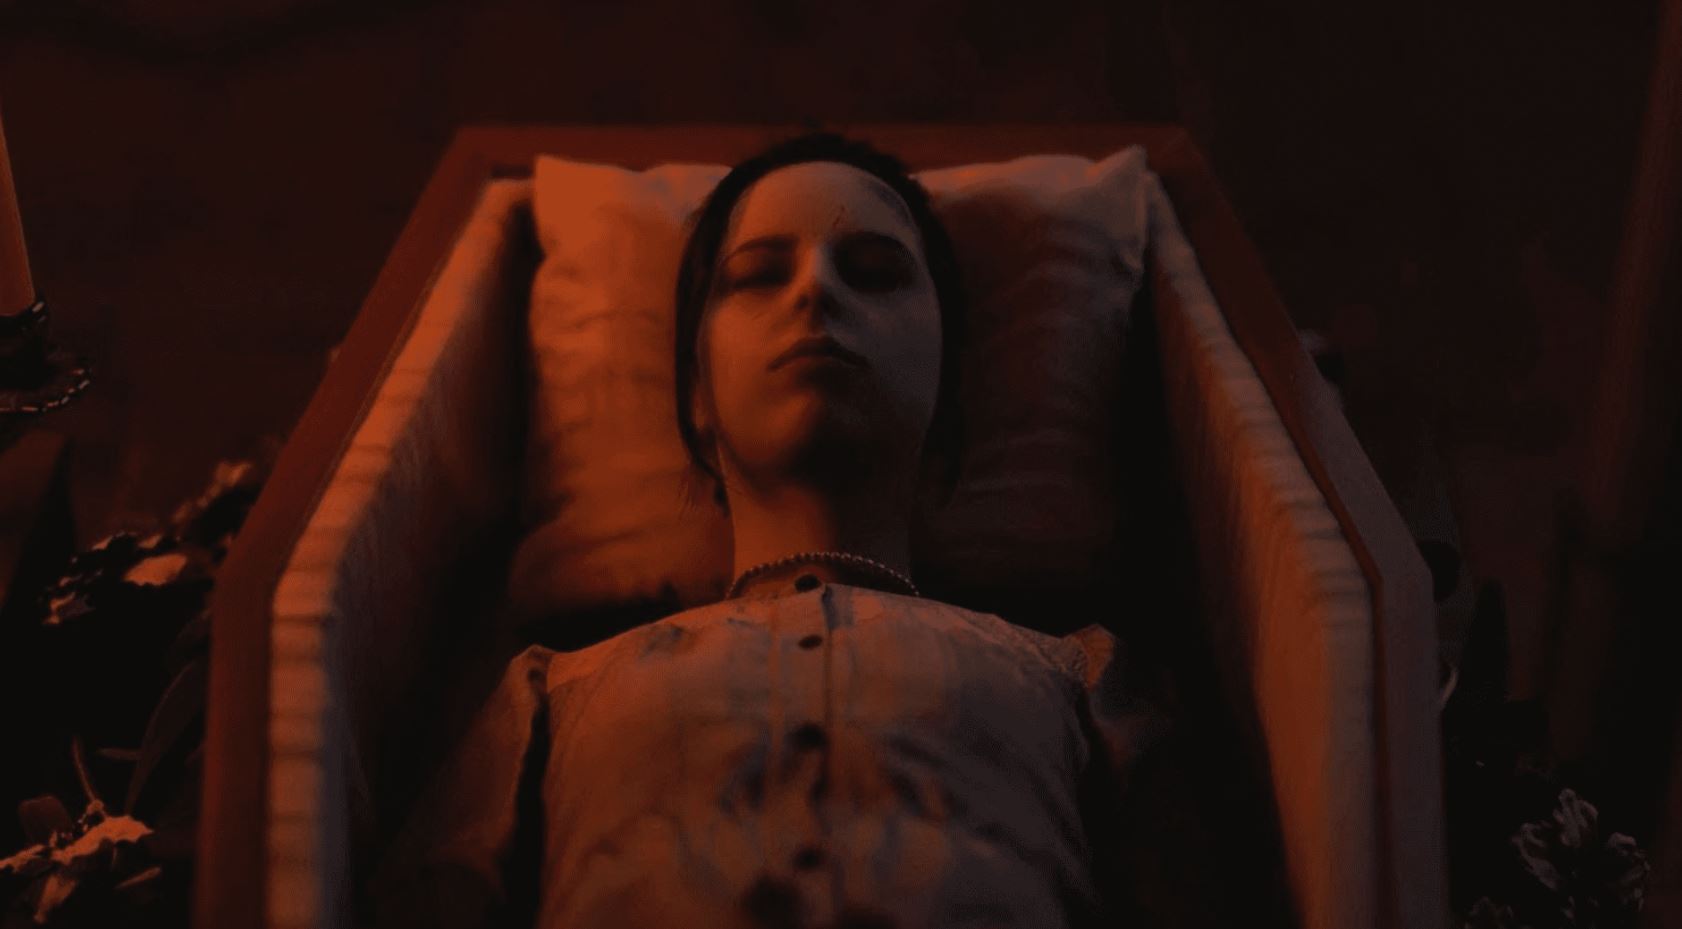 PS5 And PS4 Horror Martha Is Dead Introduces The White Lady In Latest